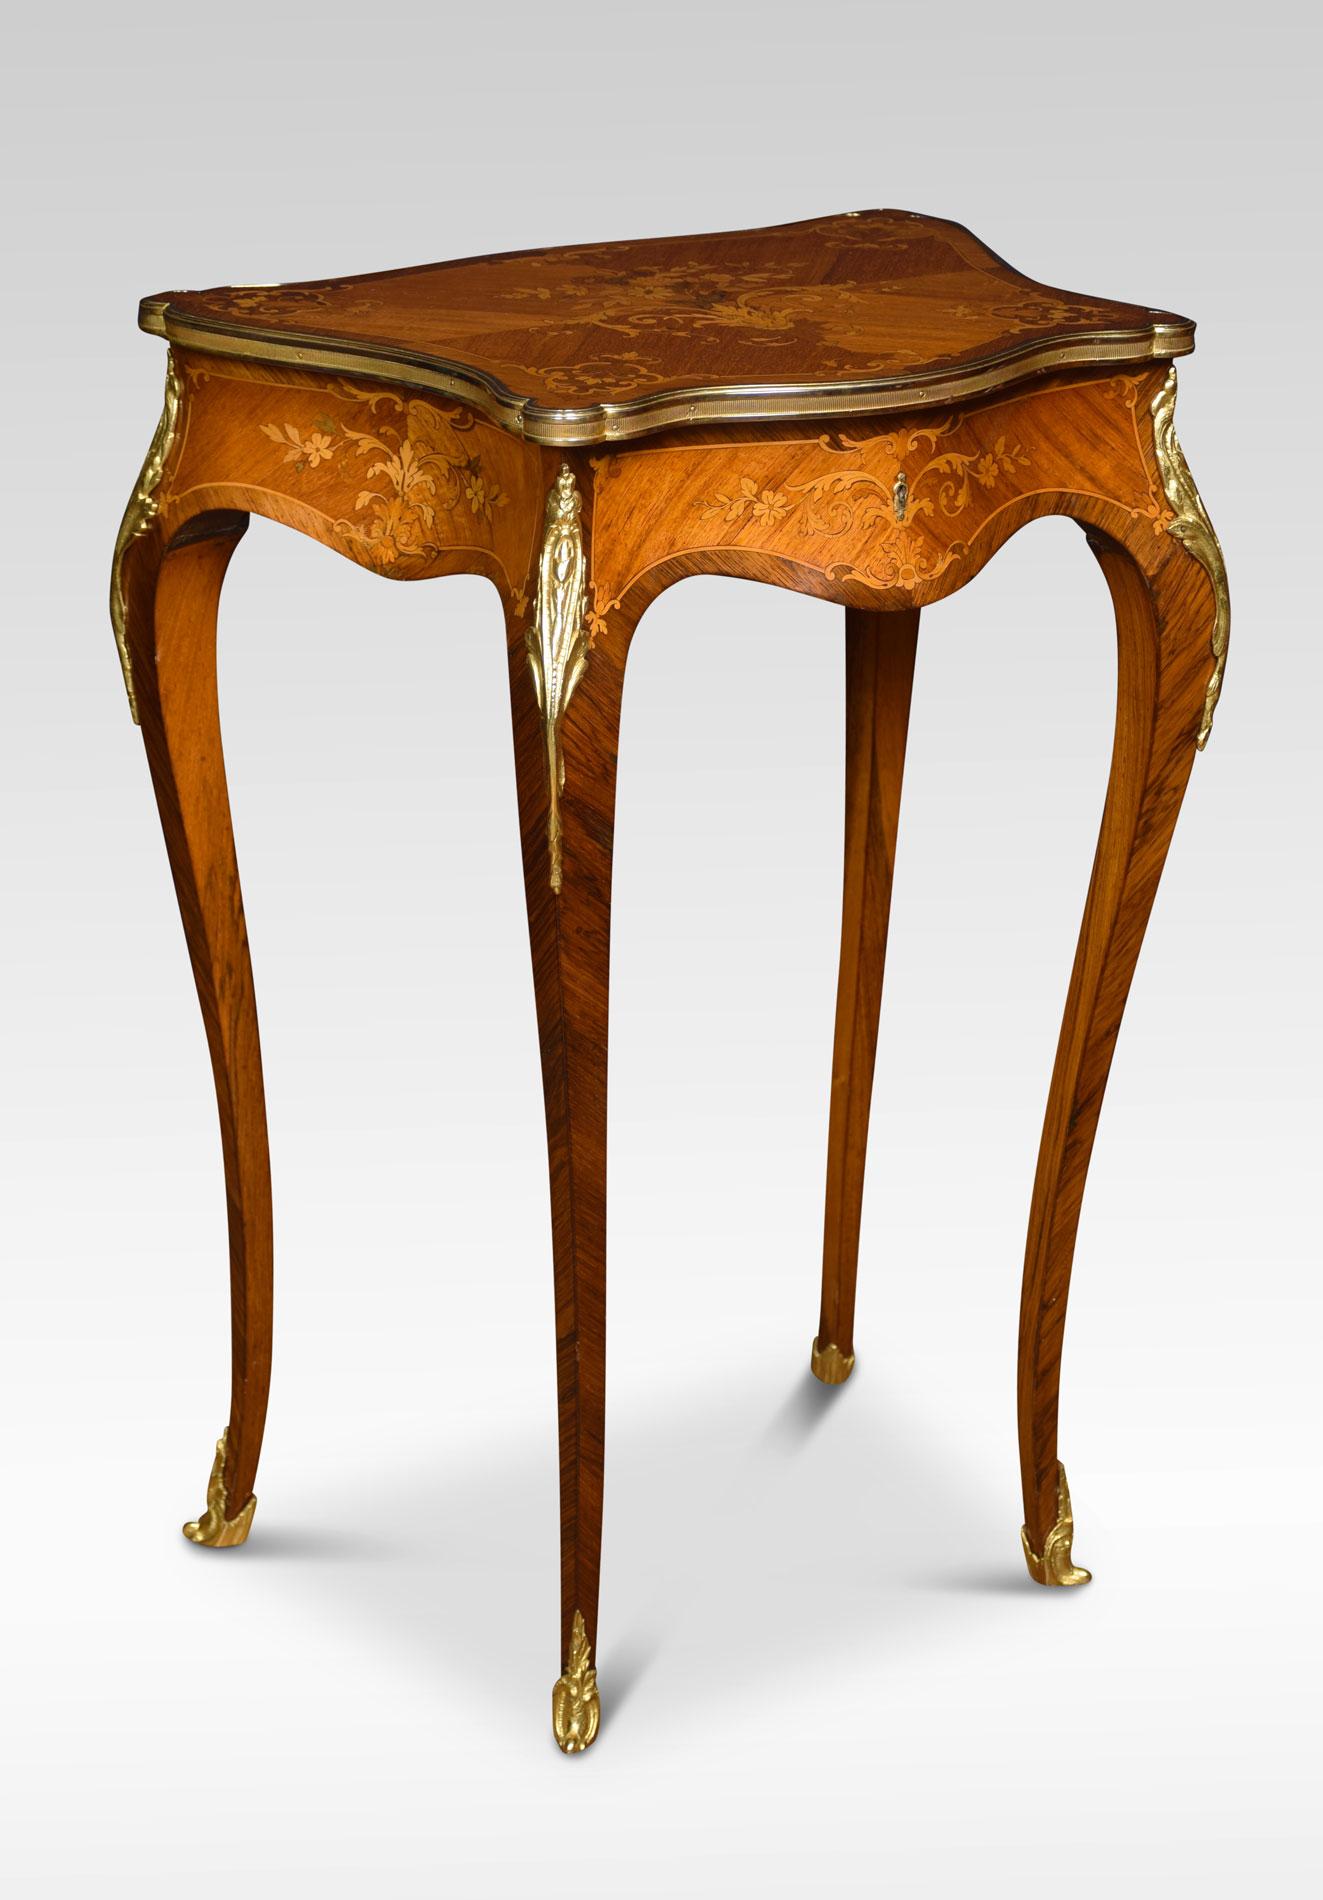 French marquetry dressing table with shaped lift up top inlaid with floral marquetry, and enclosed in brass rim. The top opening to reveal the upholstered interior. All raise upon four slender cabriole supports.
Dimensions:
Height 30 inches
Width